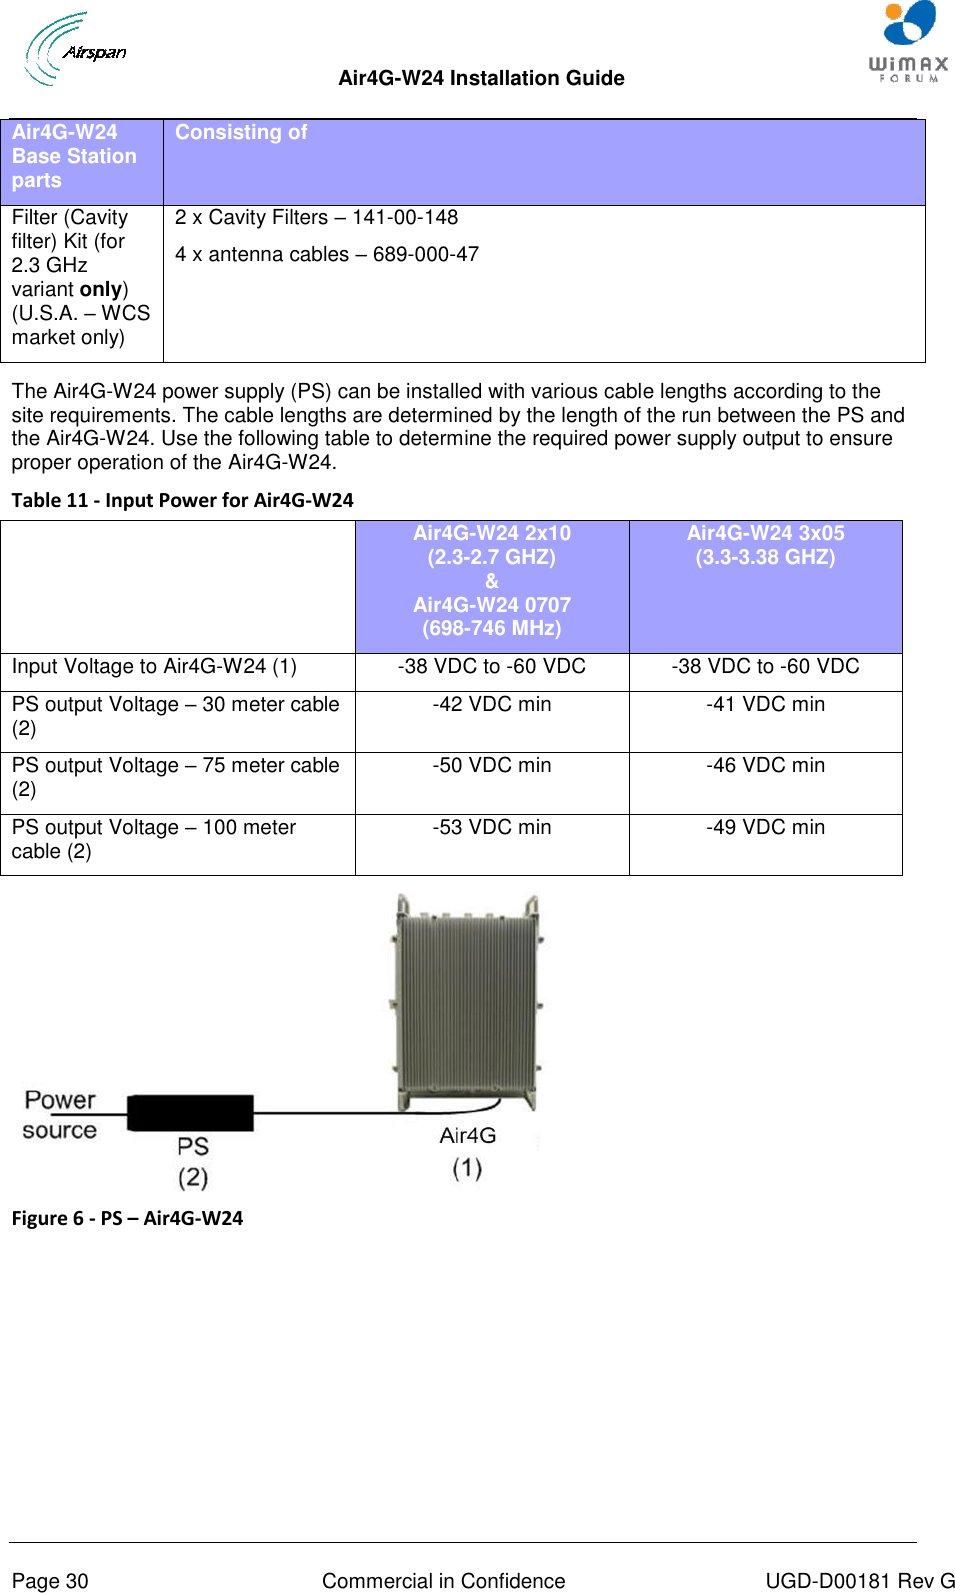  Air4G-W24 Installation Guide     Page 30  Commercial in Confidence  UGD-D00181 Rev G Air4G-W24 Base Station parts Consisting of Filter (Cavity filter) Kit (for 2.3 GHz variant only) (U.S.A. – WCS market only) 2 x Cavity Filters – 141-00-148 4 x antenna cables – 689-000-47  The Air4G-W24 power supply (PS) can be installed with various cable lengths according to the site requirements. The cable lengths are determined by the length of the run between the PS and the Air4G-W24. Use the following table to determine the required power supply output to ensure proper operation of the Air4G-W24. Table 11 - Input Power for Air4G-W24  Air4G-W24 2x10 (2.3-2.7 GHZ) &amp; Air4G-W24 0707 (698-746 MHz) Air4G-W24 3x05 (3.3-3.38 GHZ) Input Voltage to Air4G-W24 (1) -38 VDC to -60 VDC -38 VDC to -60 VDC PS output Voltage – 30 meter cable (2) -42 VDC min -41 VDC min PS output Voltage – 75 meter cable (2) -50 VDC min -46 VDC min PS output Voltage – 100 meter cable (2) -53 VDC min -49 VDC min      Figure 6 - PS – Air4G-W24